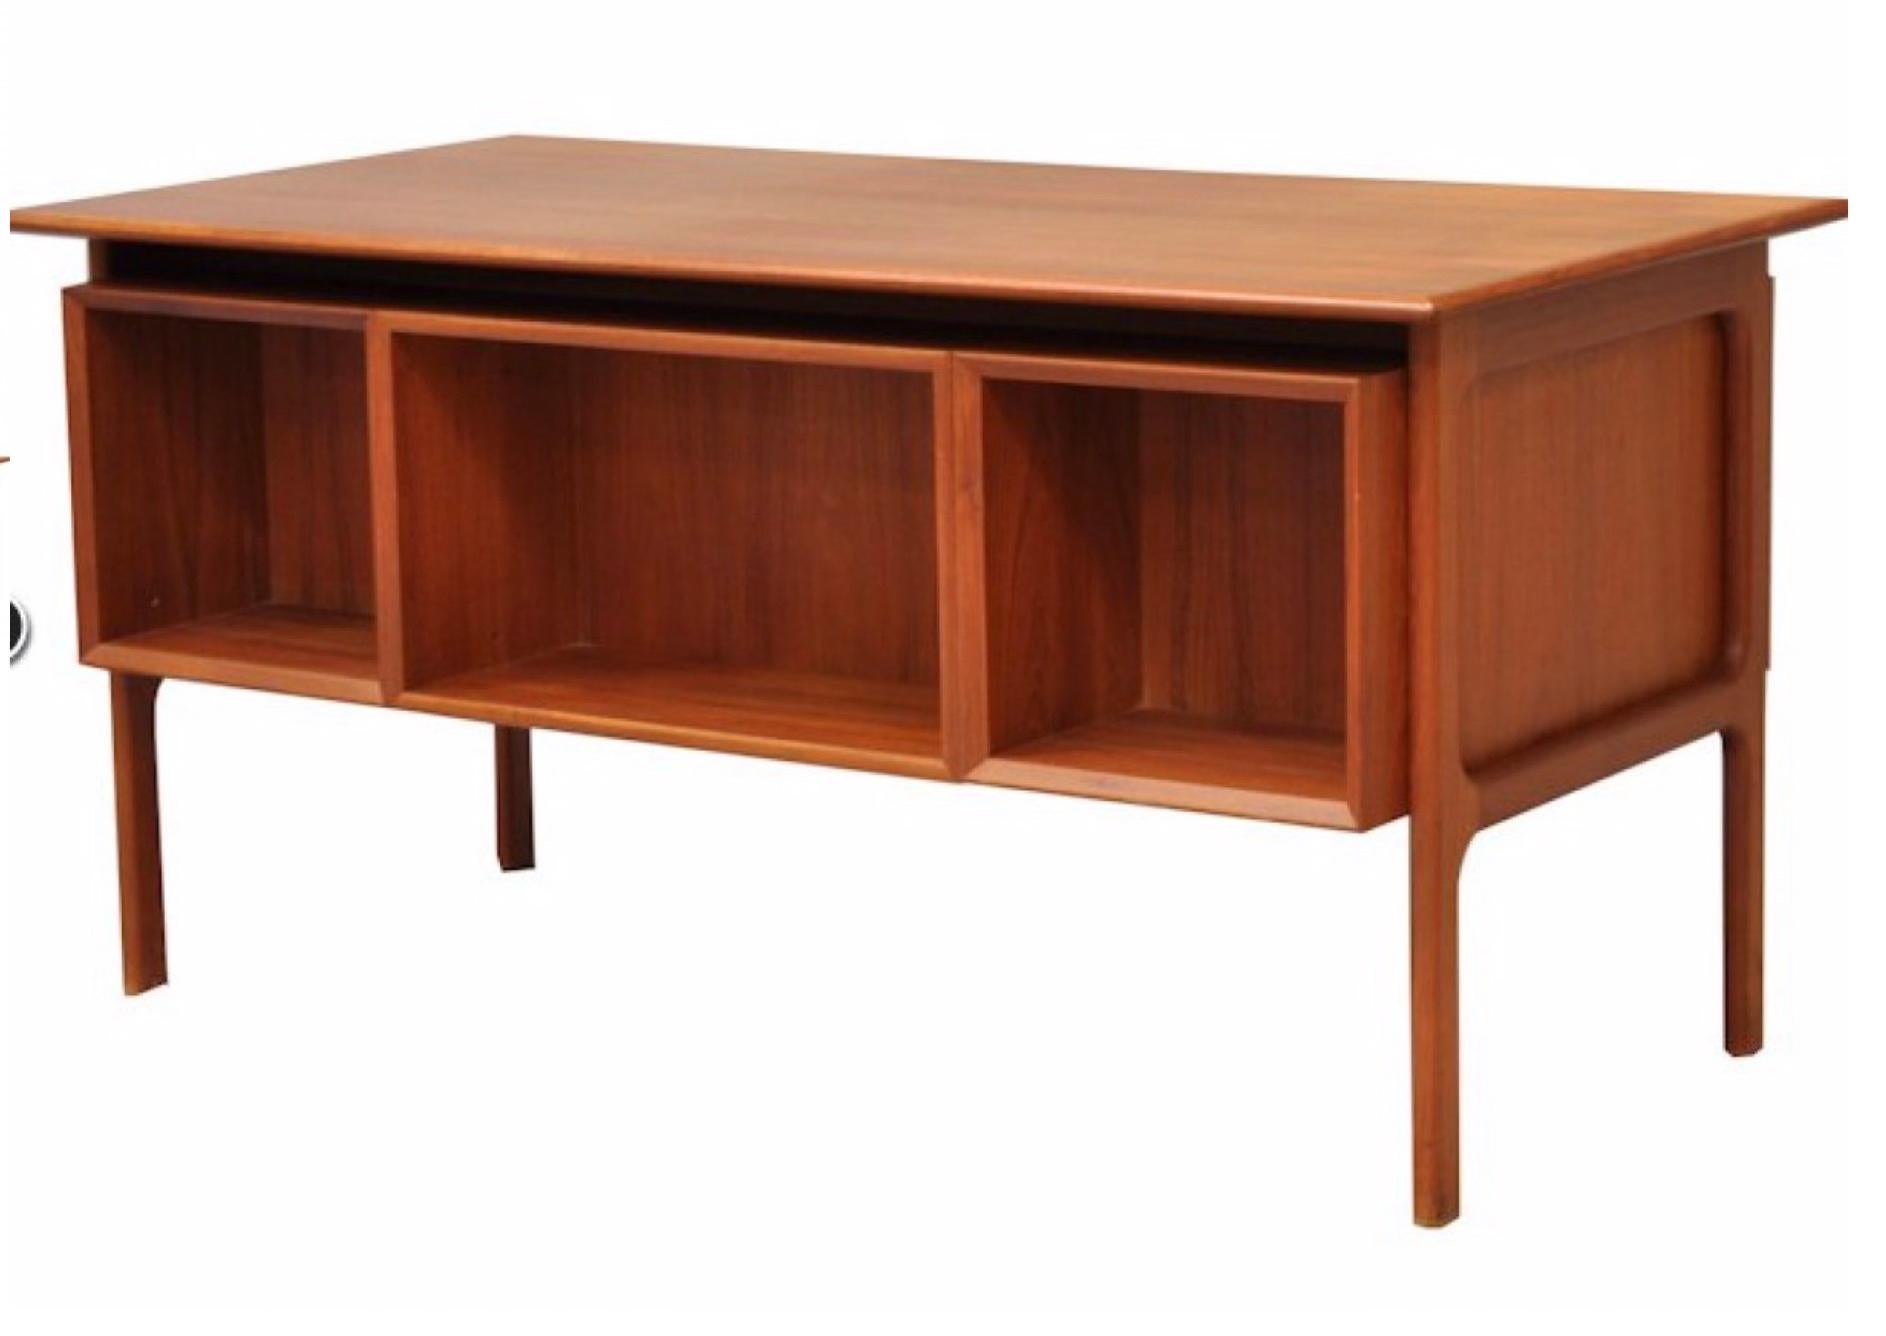 Danish double sided teak desk by Arne Vodder for Sibast. Measures: 145 cm x 75 x 72 H. In a perfect state, 1960.